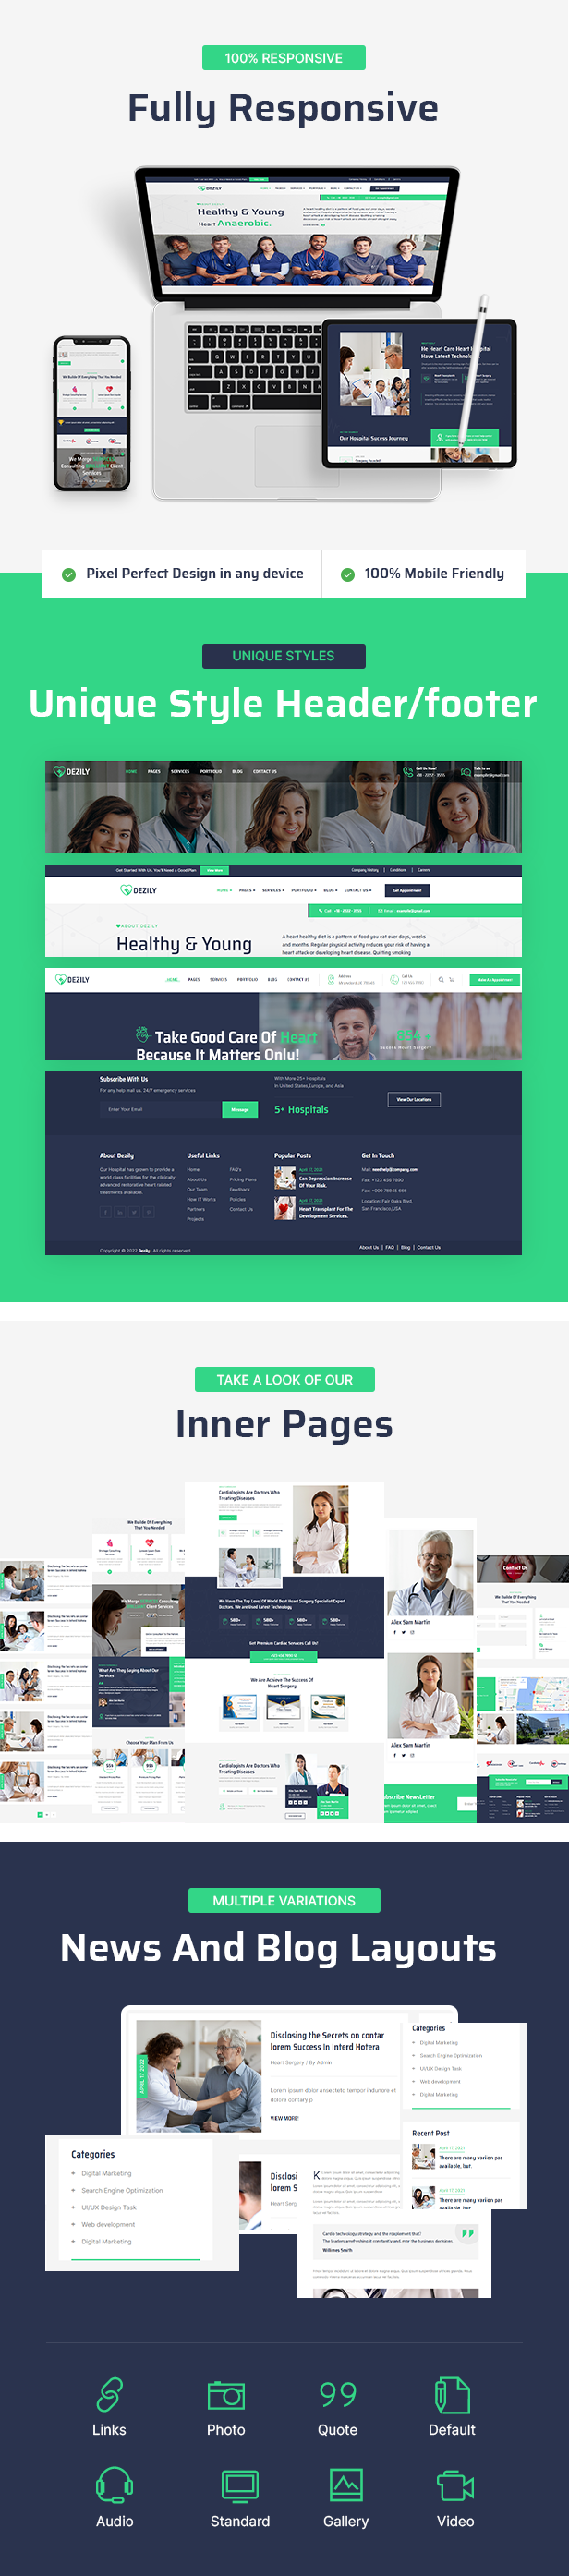 Cardiologist And Medical Html Template